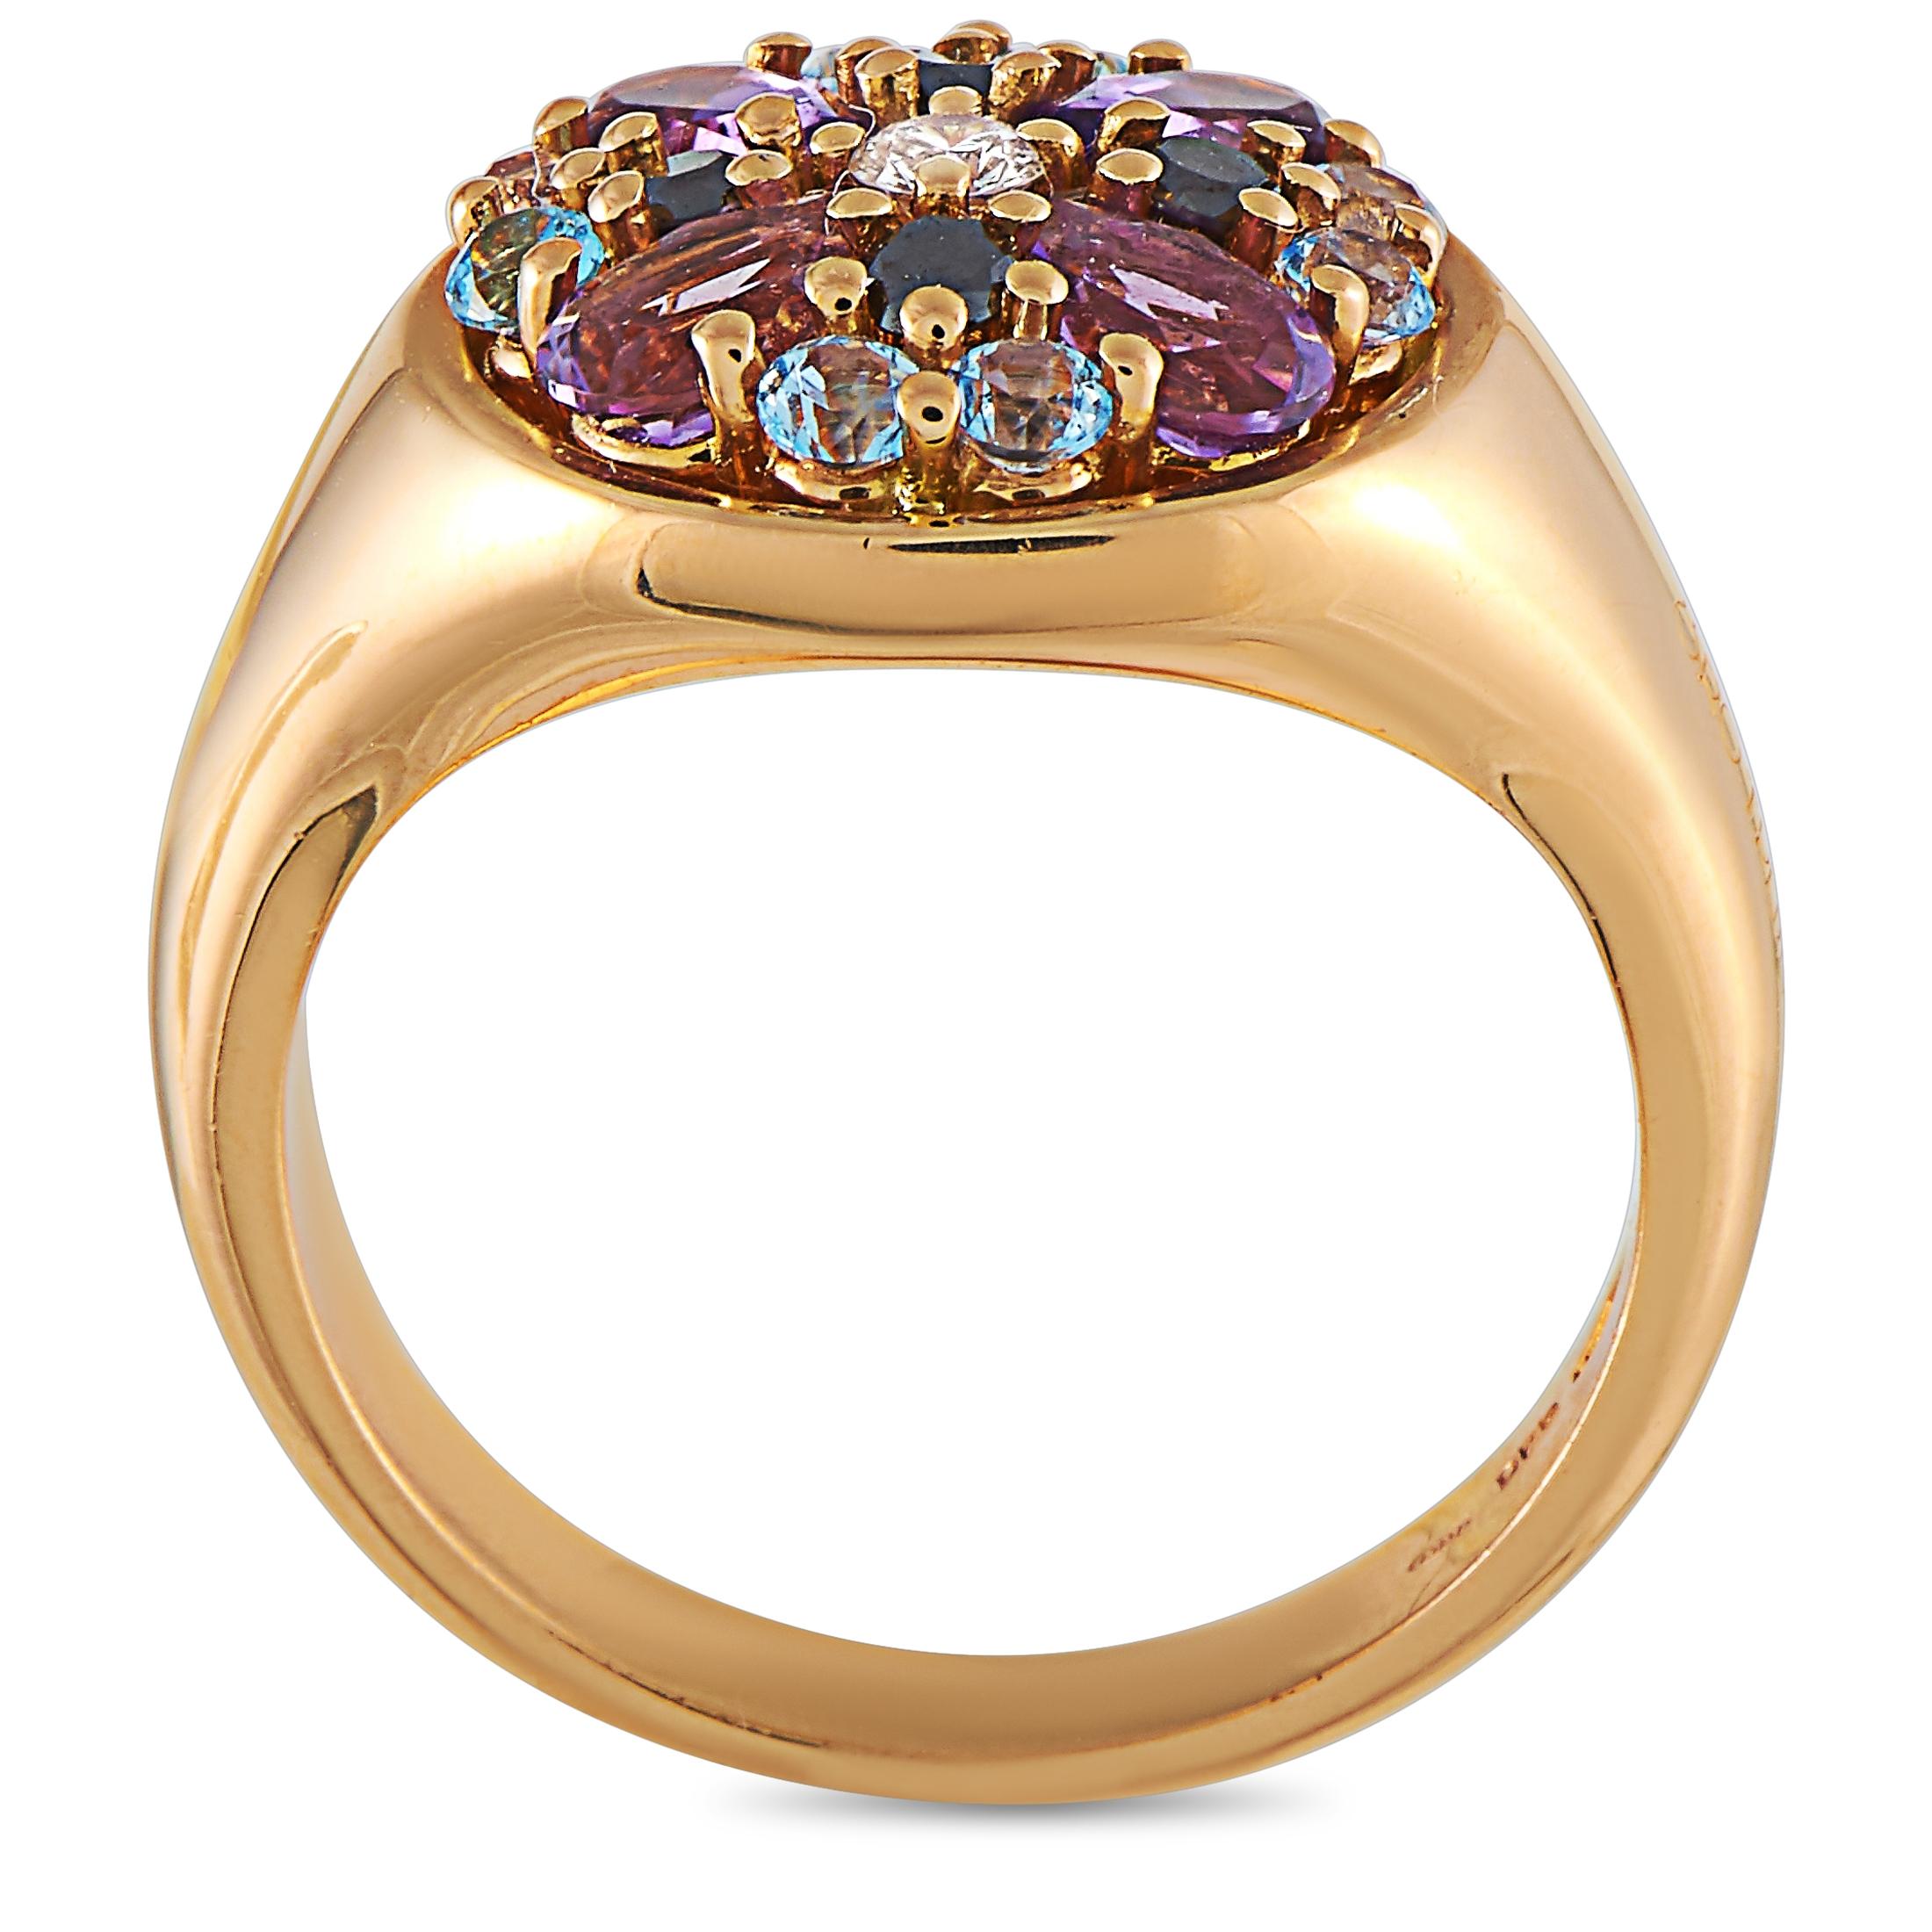 This Oro Trend ring is made of 18K rose gold and weighs 8.3 grams, boasting band thickness of 5 mm and top height of 5 mm, while top dimensions measure 13 by 14 mm. The ring is embellished with amethysts and topazes, a 0.06 ct white diamond stone,